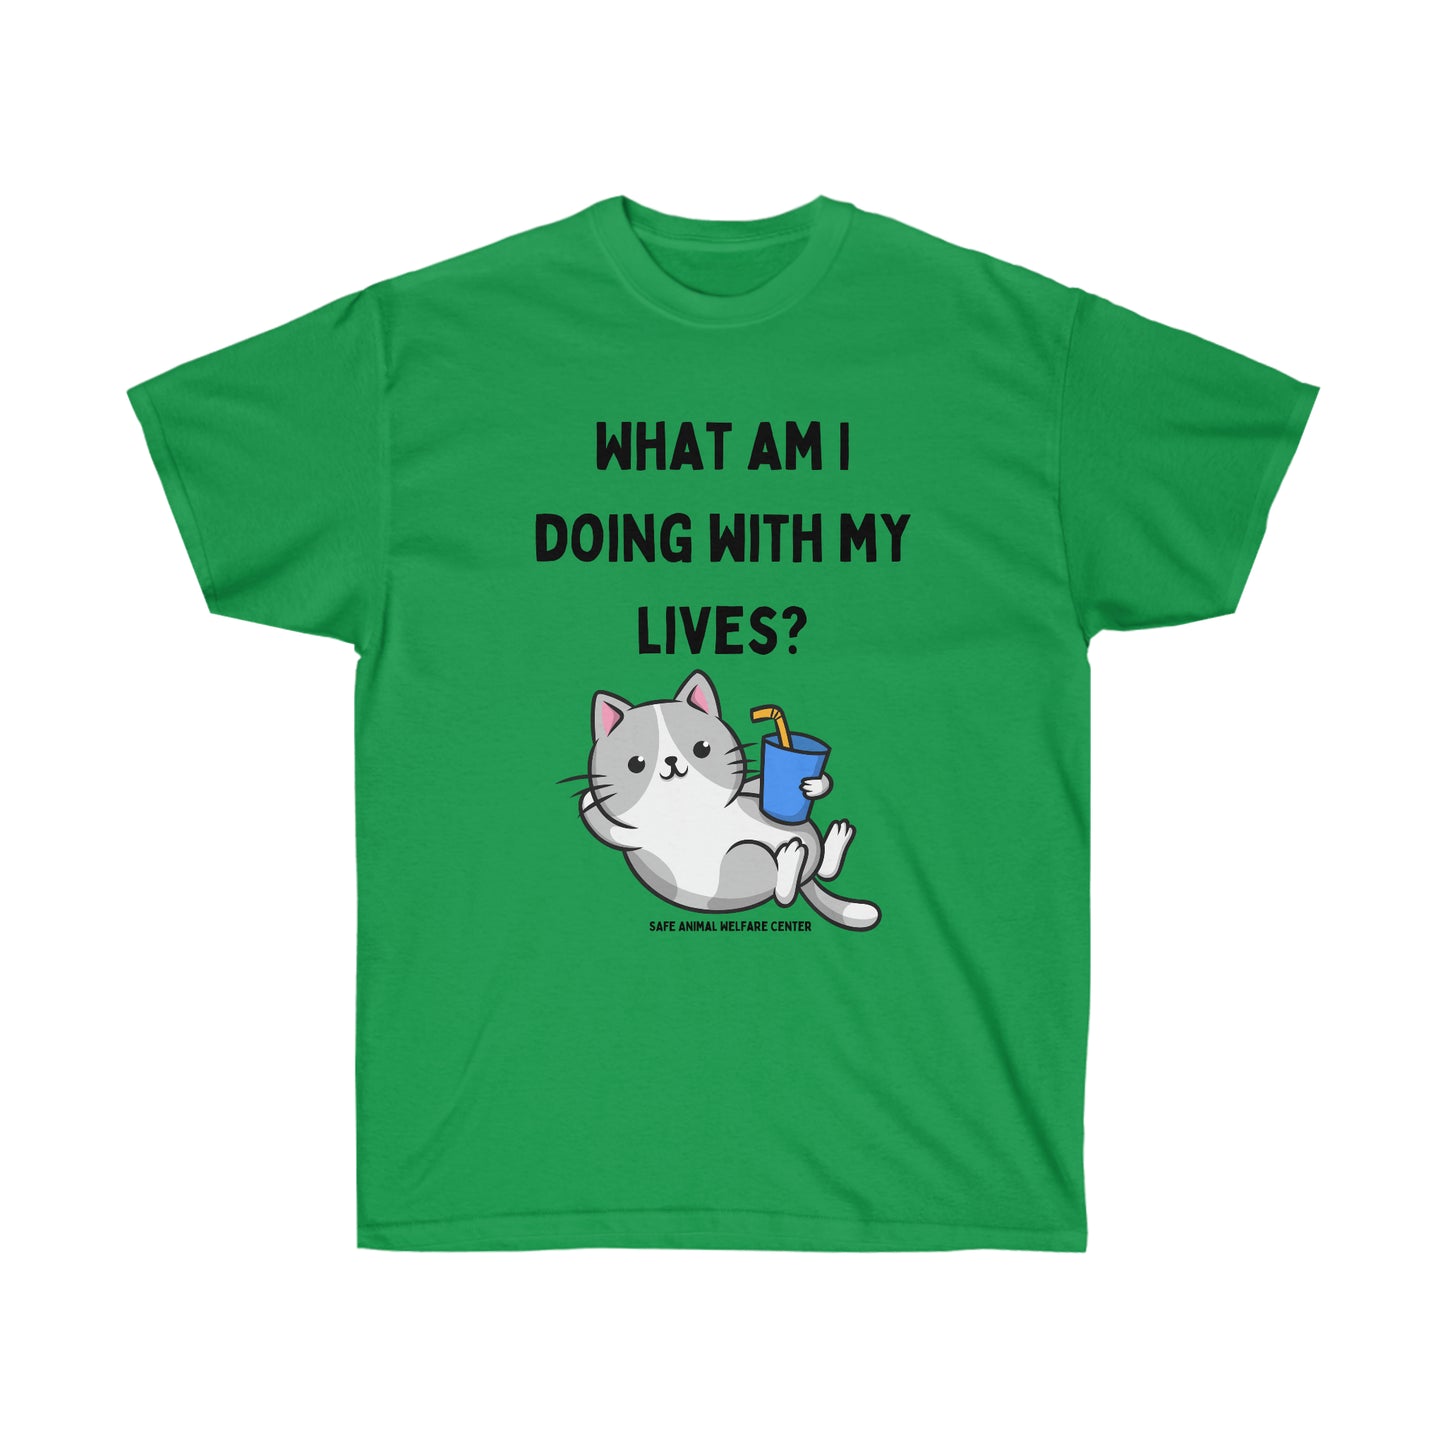 What am i doing with my lives? Unisex Ultra Cotton Tee